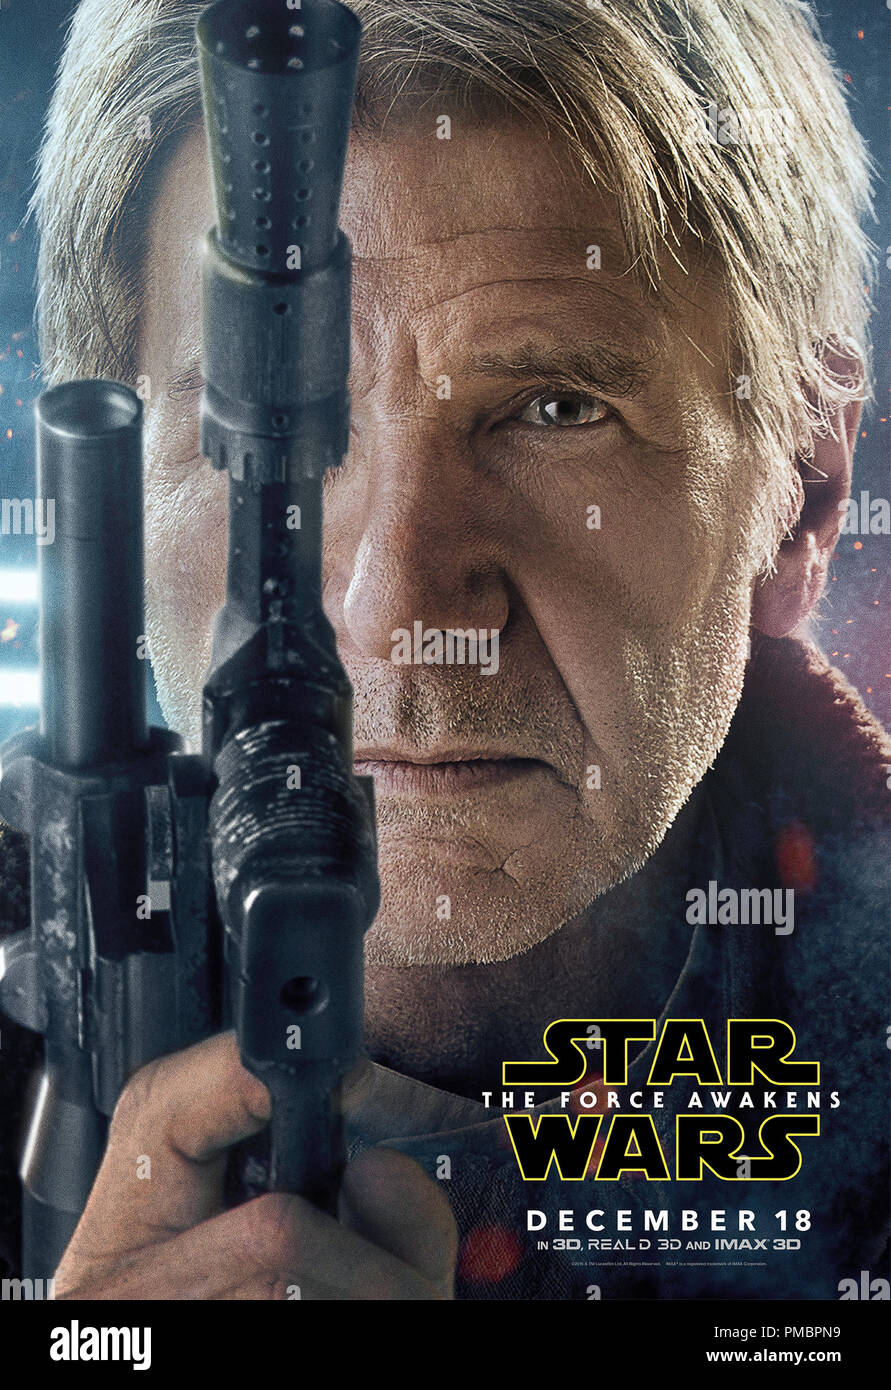 Harrison Ford is 'doing really well' after Star Wars Episode 7